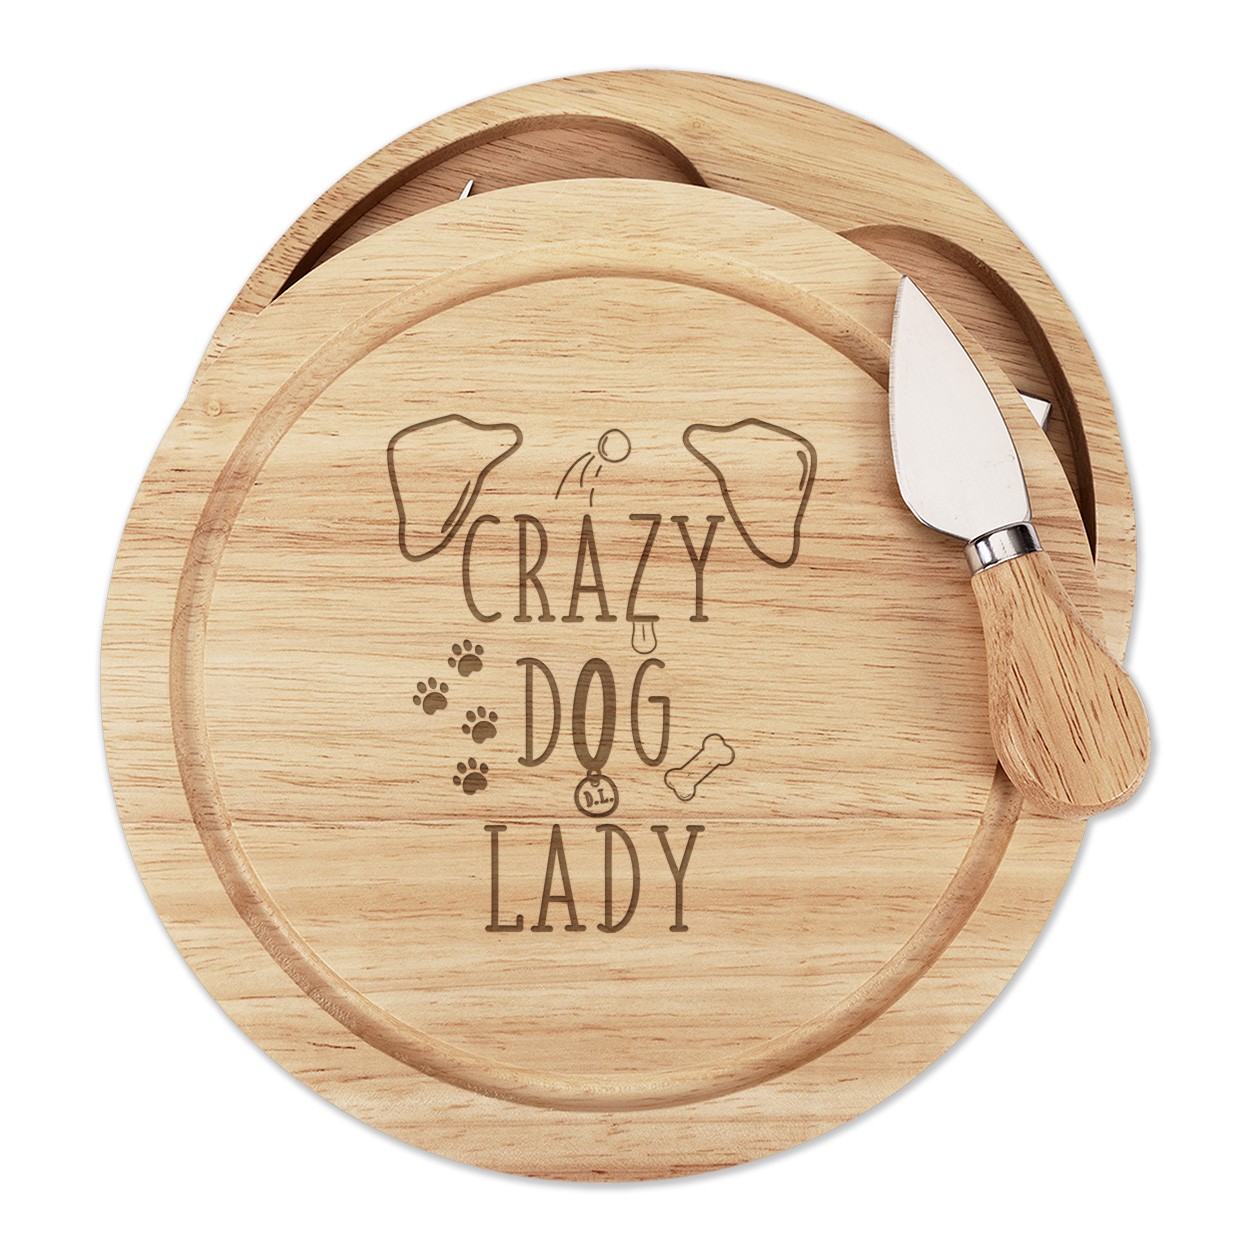 Crazy Dog Lady Brown Ears Wooden Cheese Board Set 4 Knives